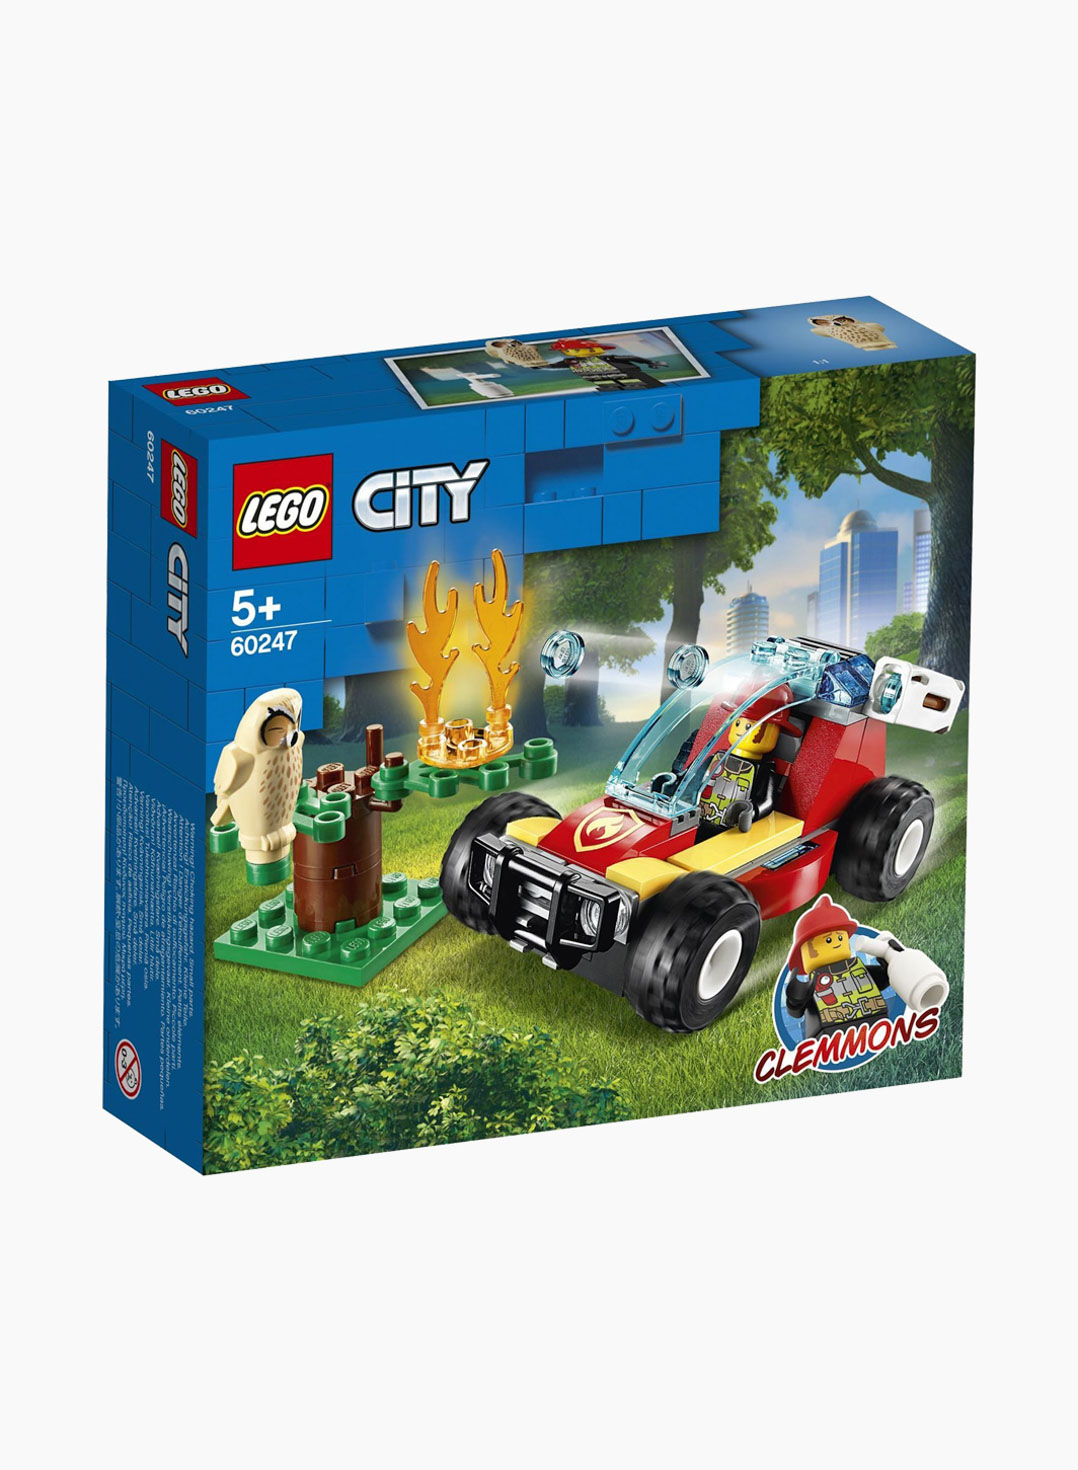 Lego City Constructor Forest Fire